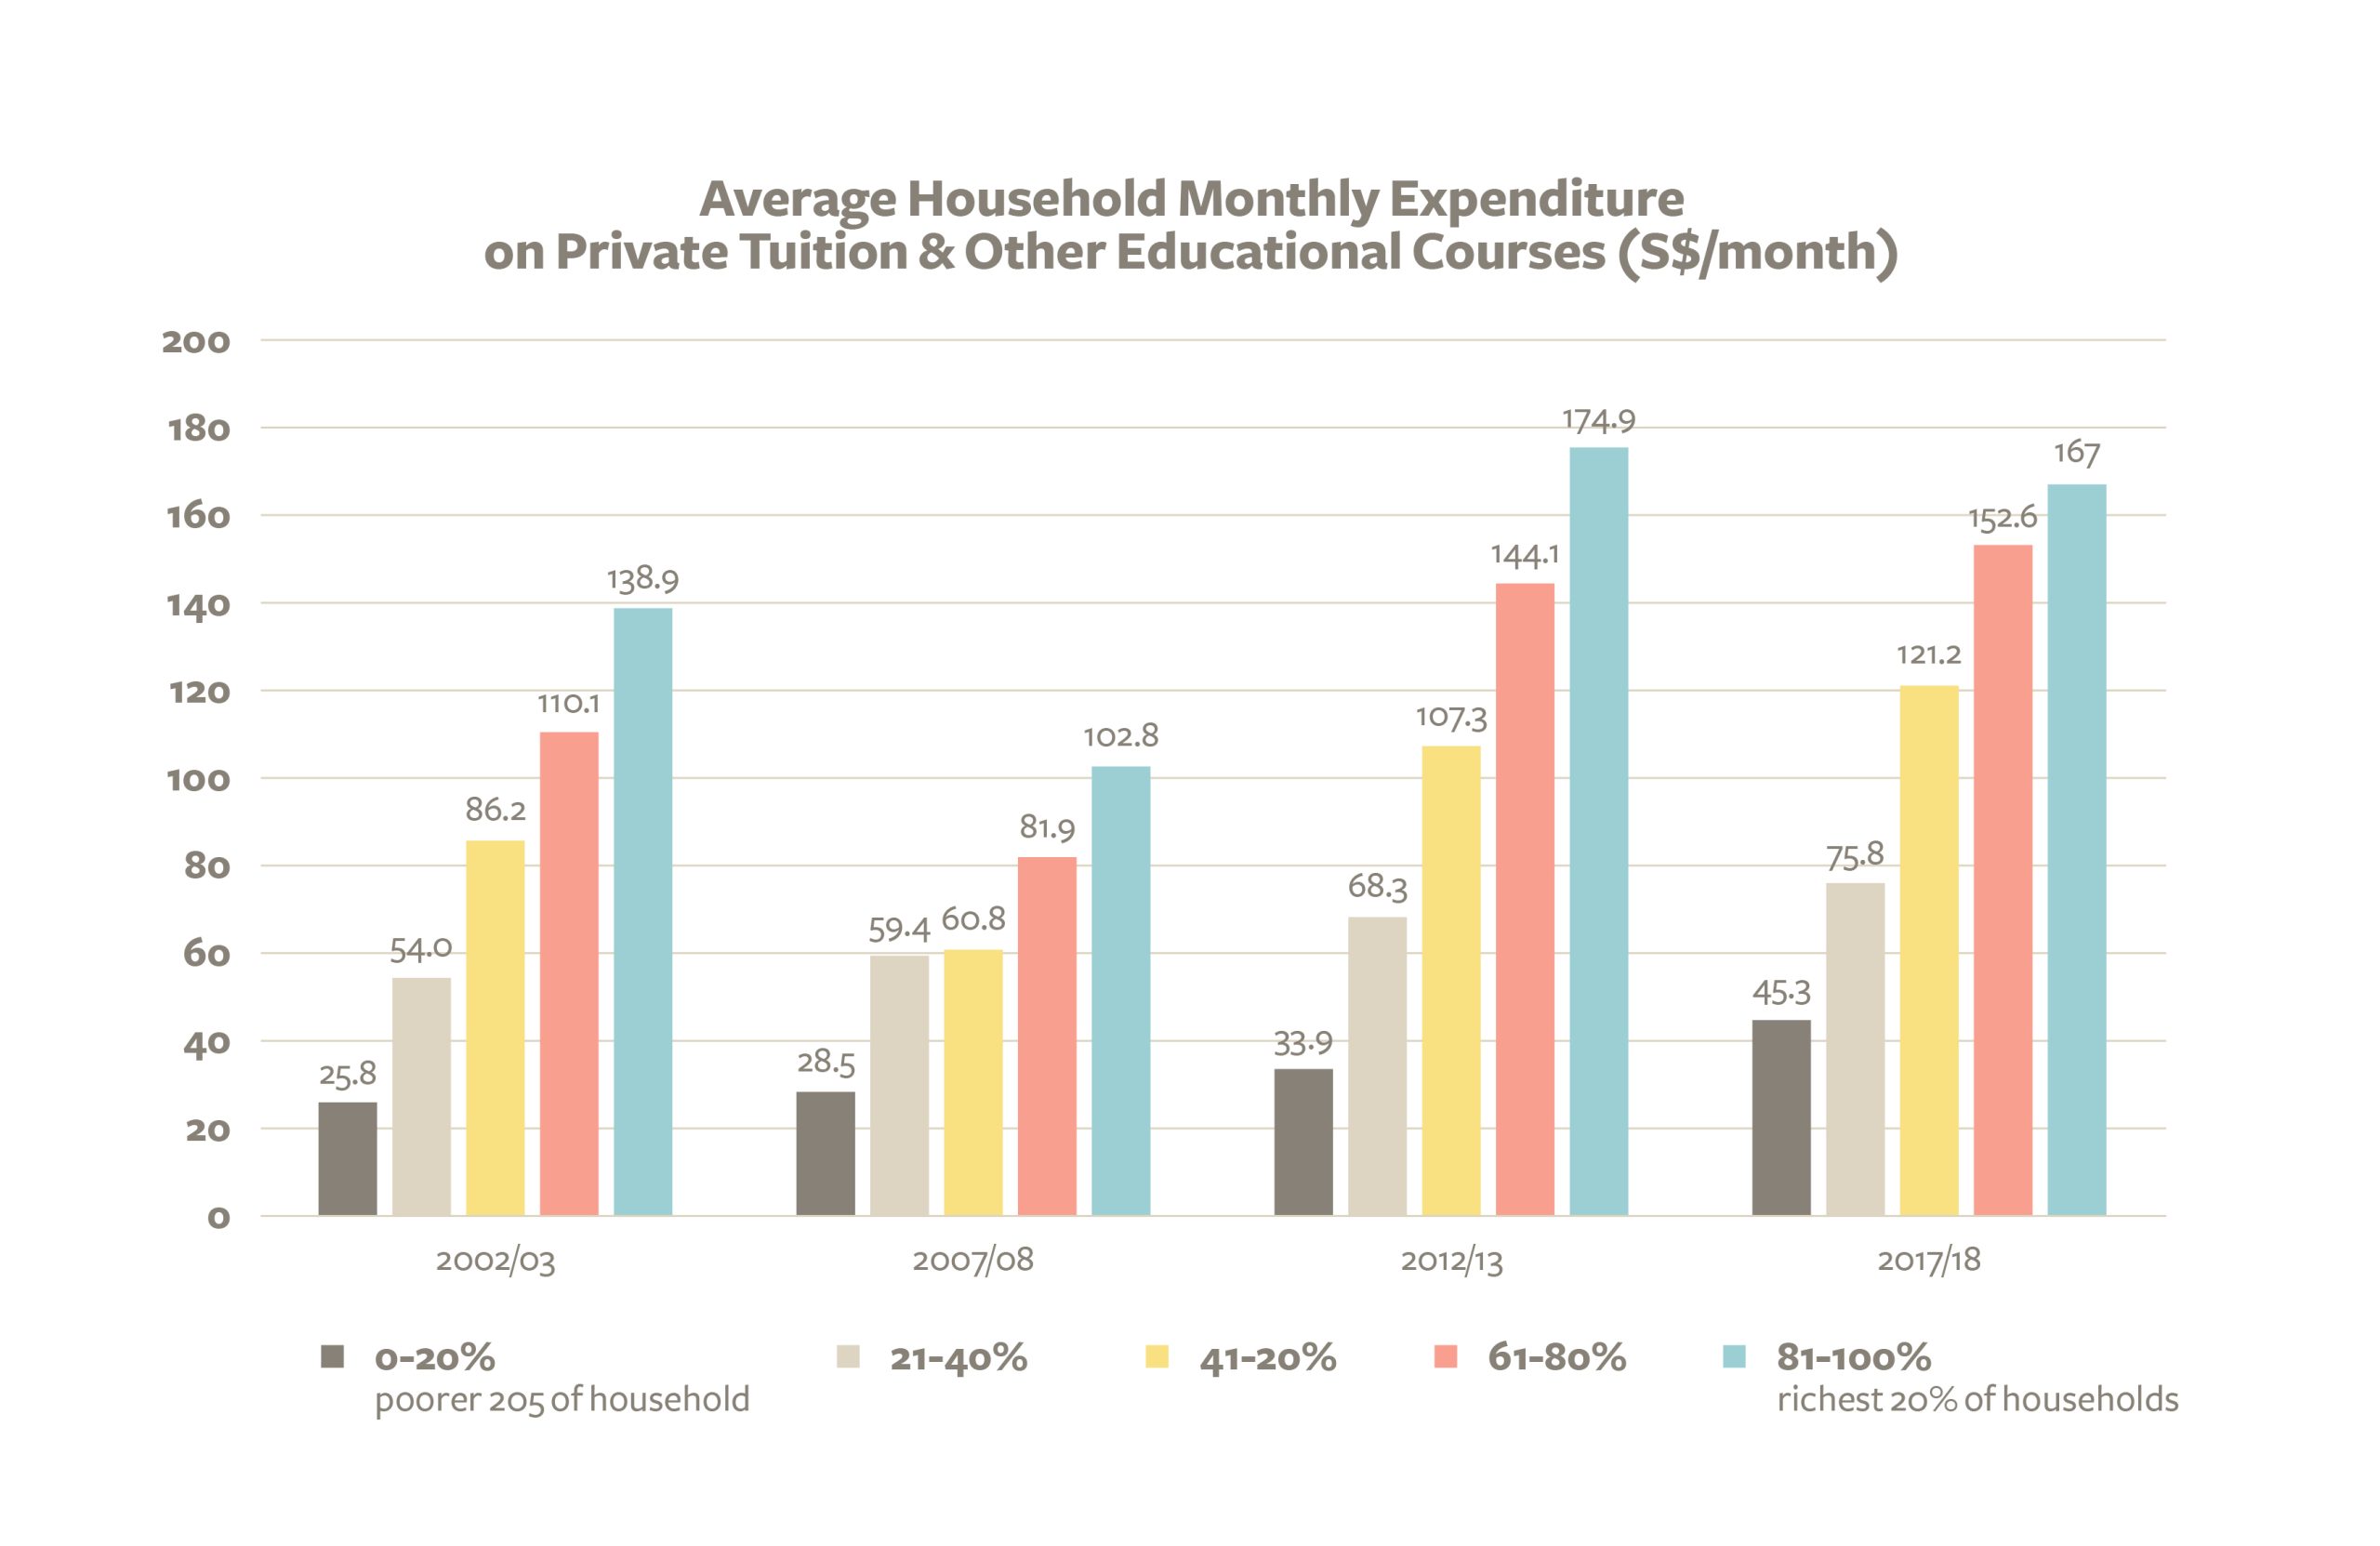 Figure 12a: Average Household Monthly Expenditure on Private Tuition and Other Educational Courses (S$). Visualisation of Figure 12, above.